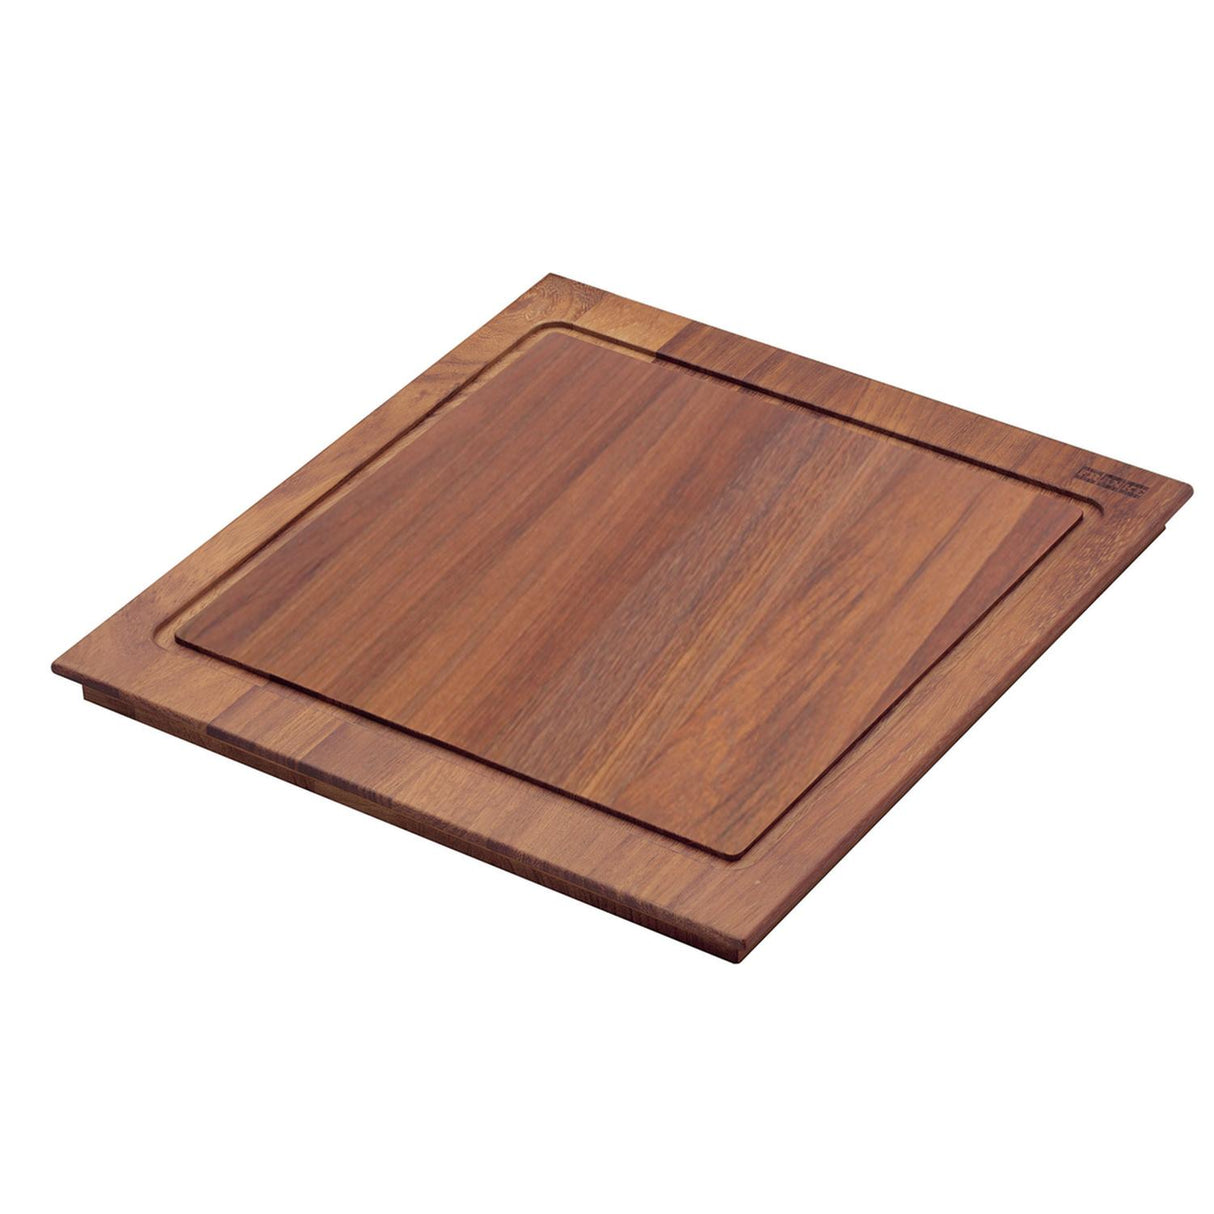 FRANKE PX-40S 14.4-in. x 17.1-in. Solid Wood Cutting Board for Peak Series Sink